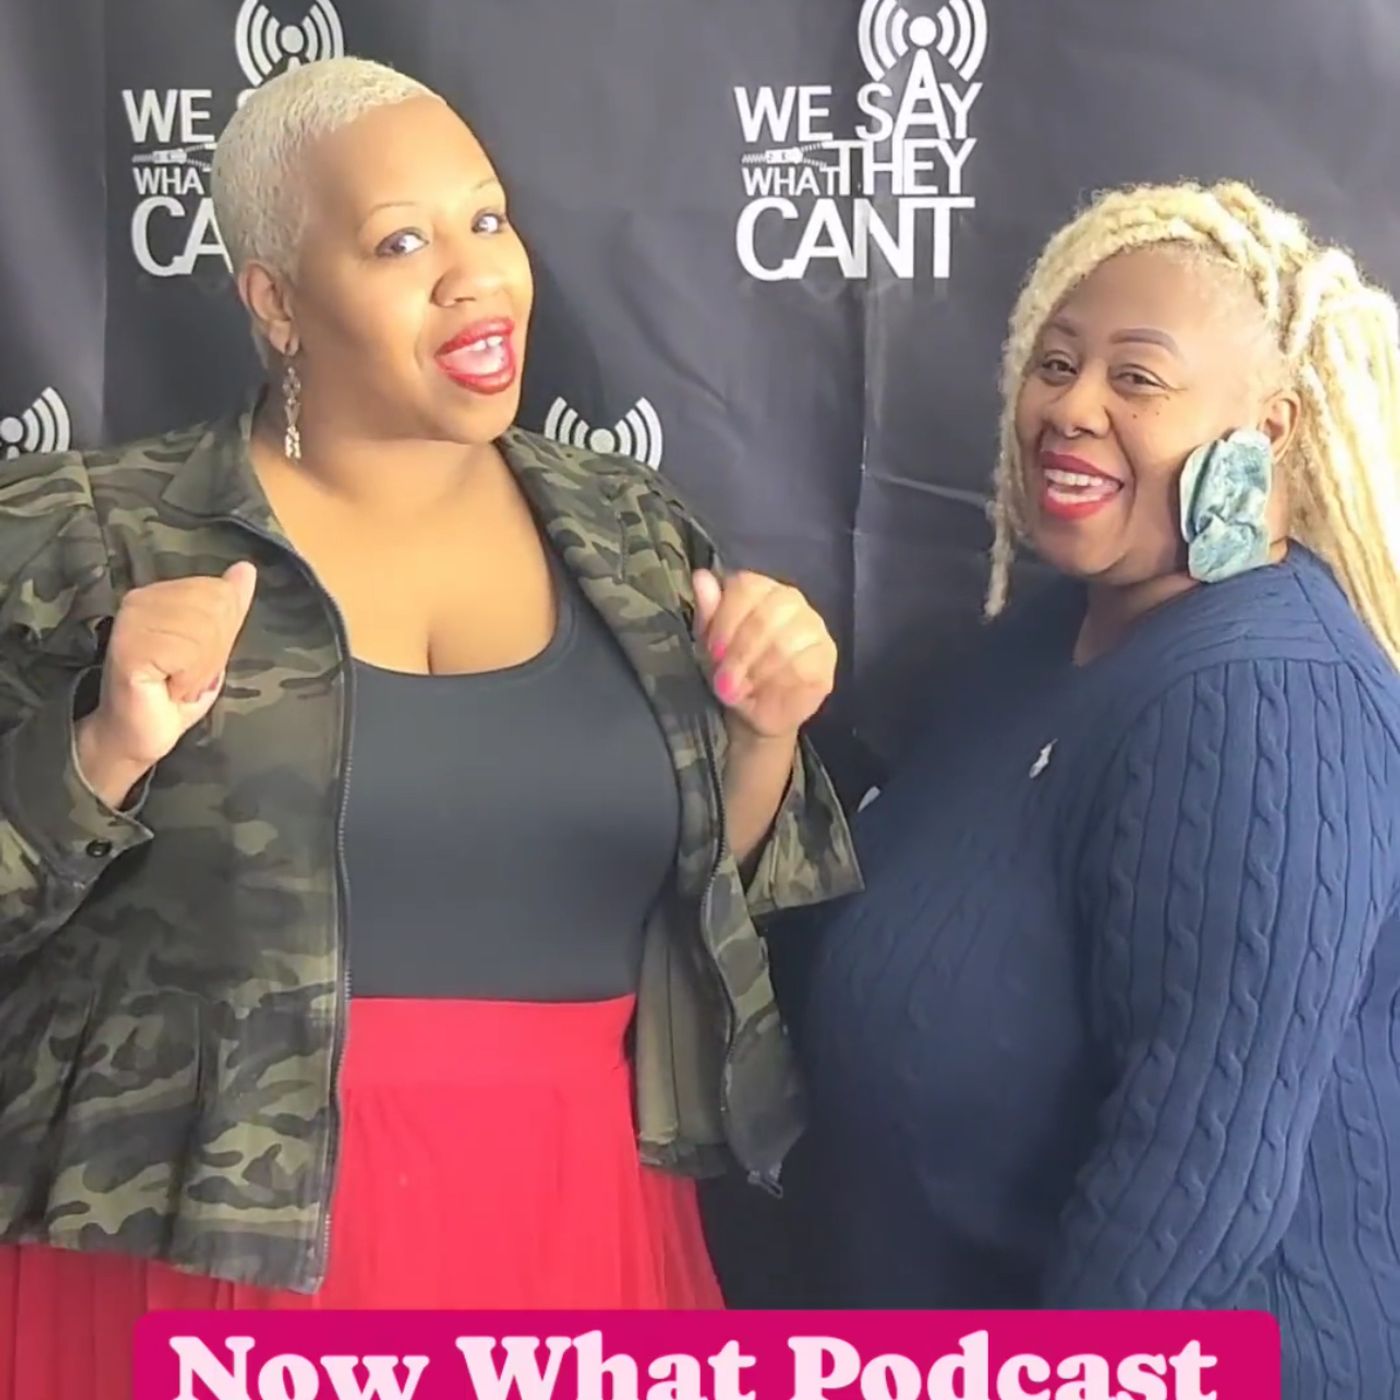 Now What Podcast - Sister Series PT1 feat Q & Candice